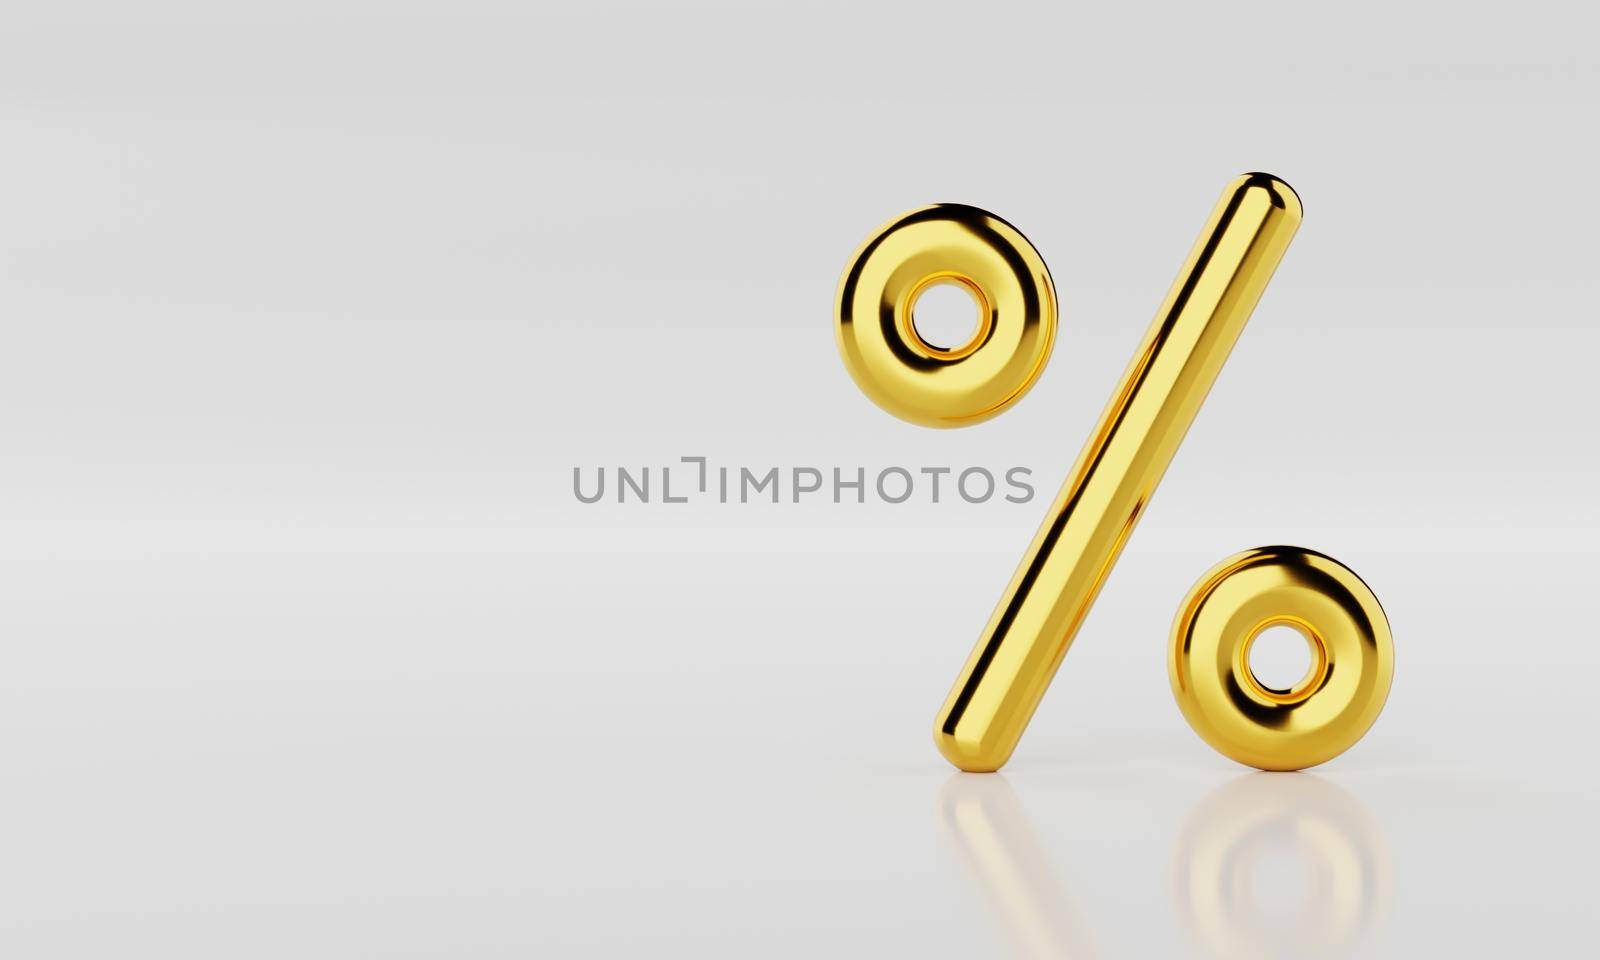 Golden percentage sign on white background with copy space. Mathematics and Business financial economic concept. 3D illustration rendering